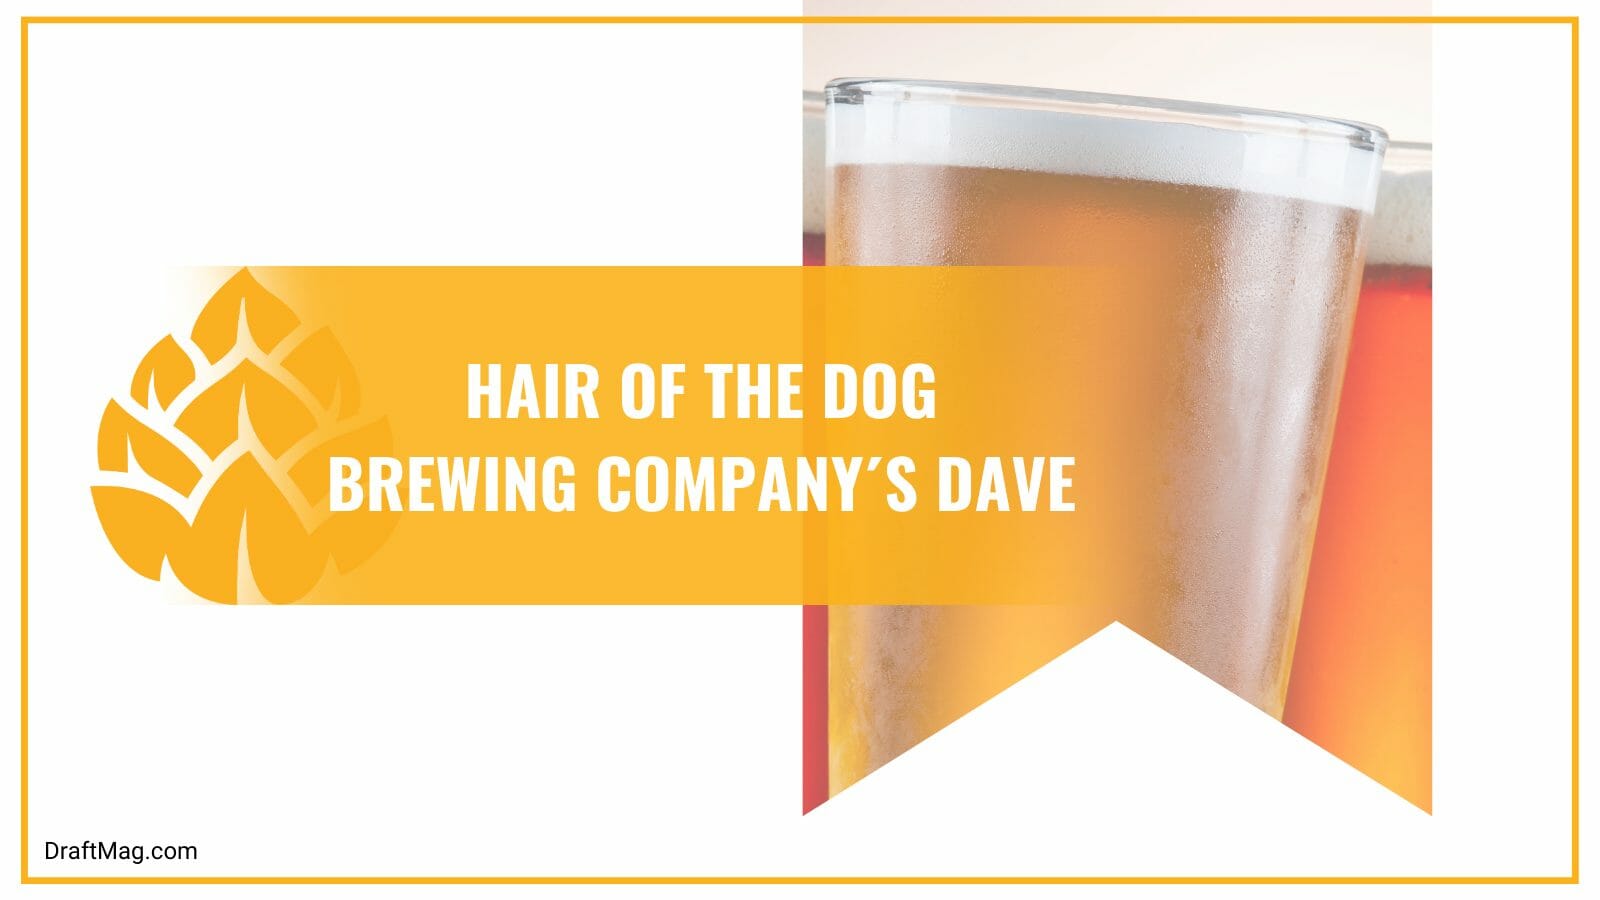 Hair of the dog brewing